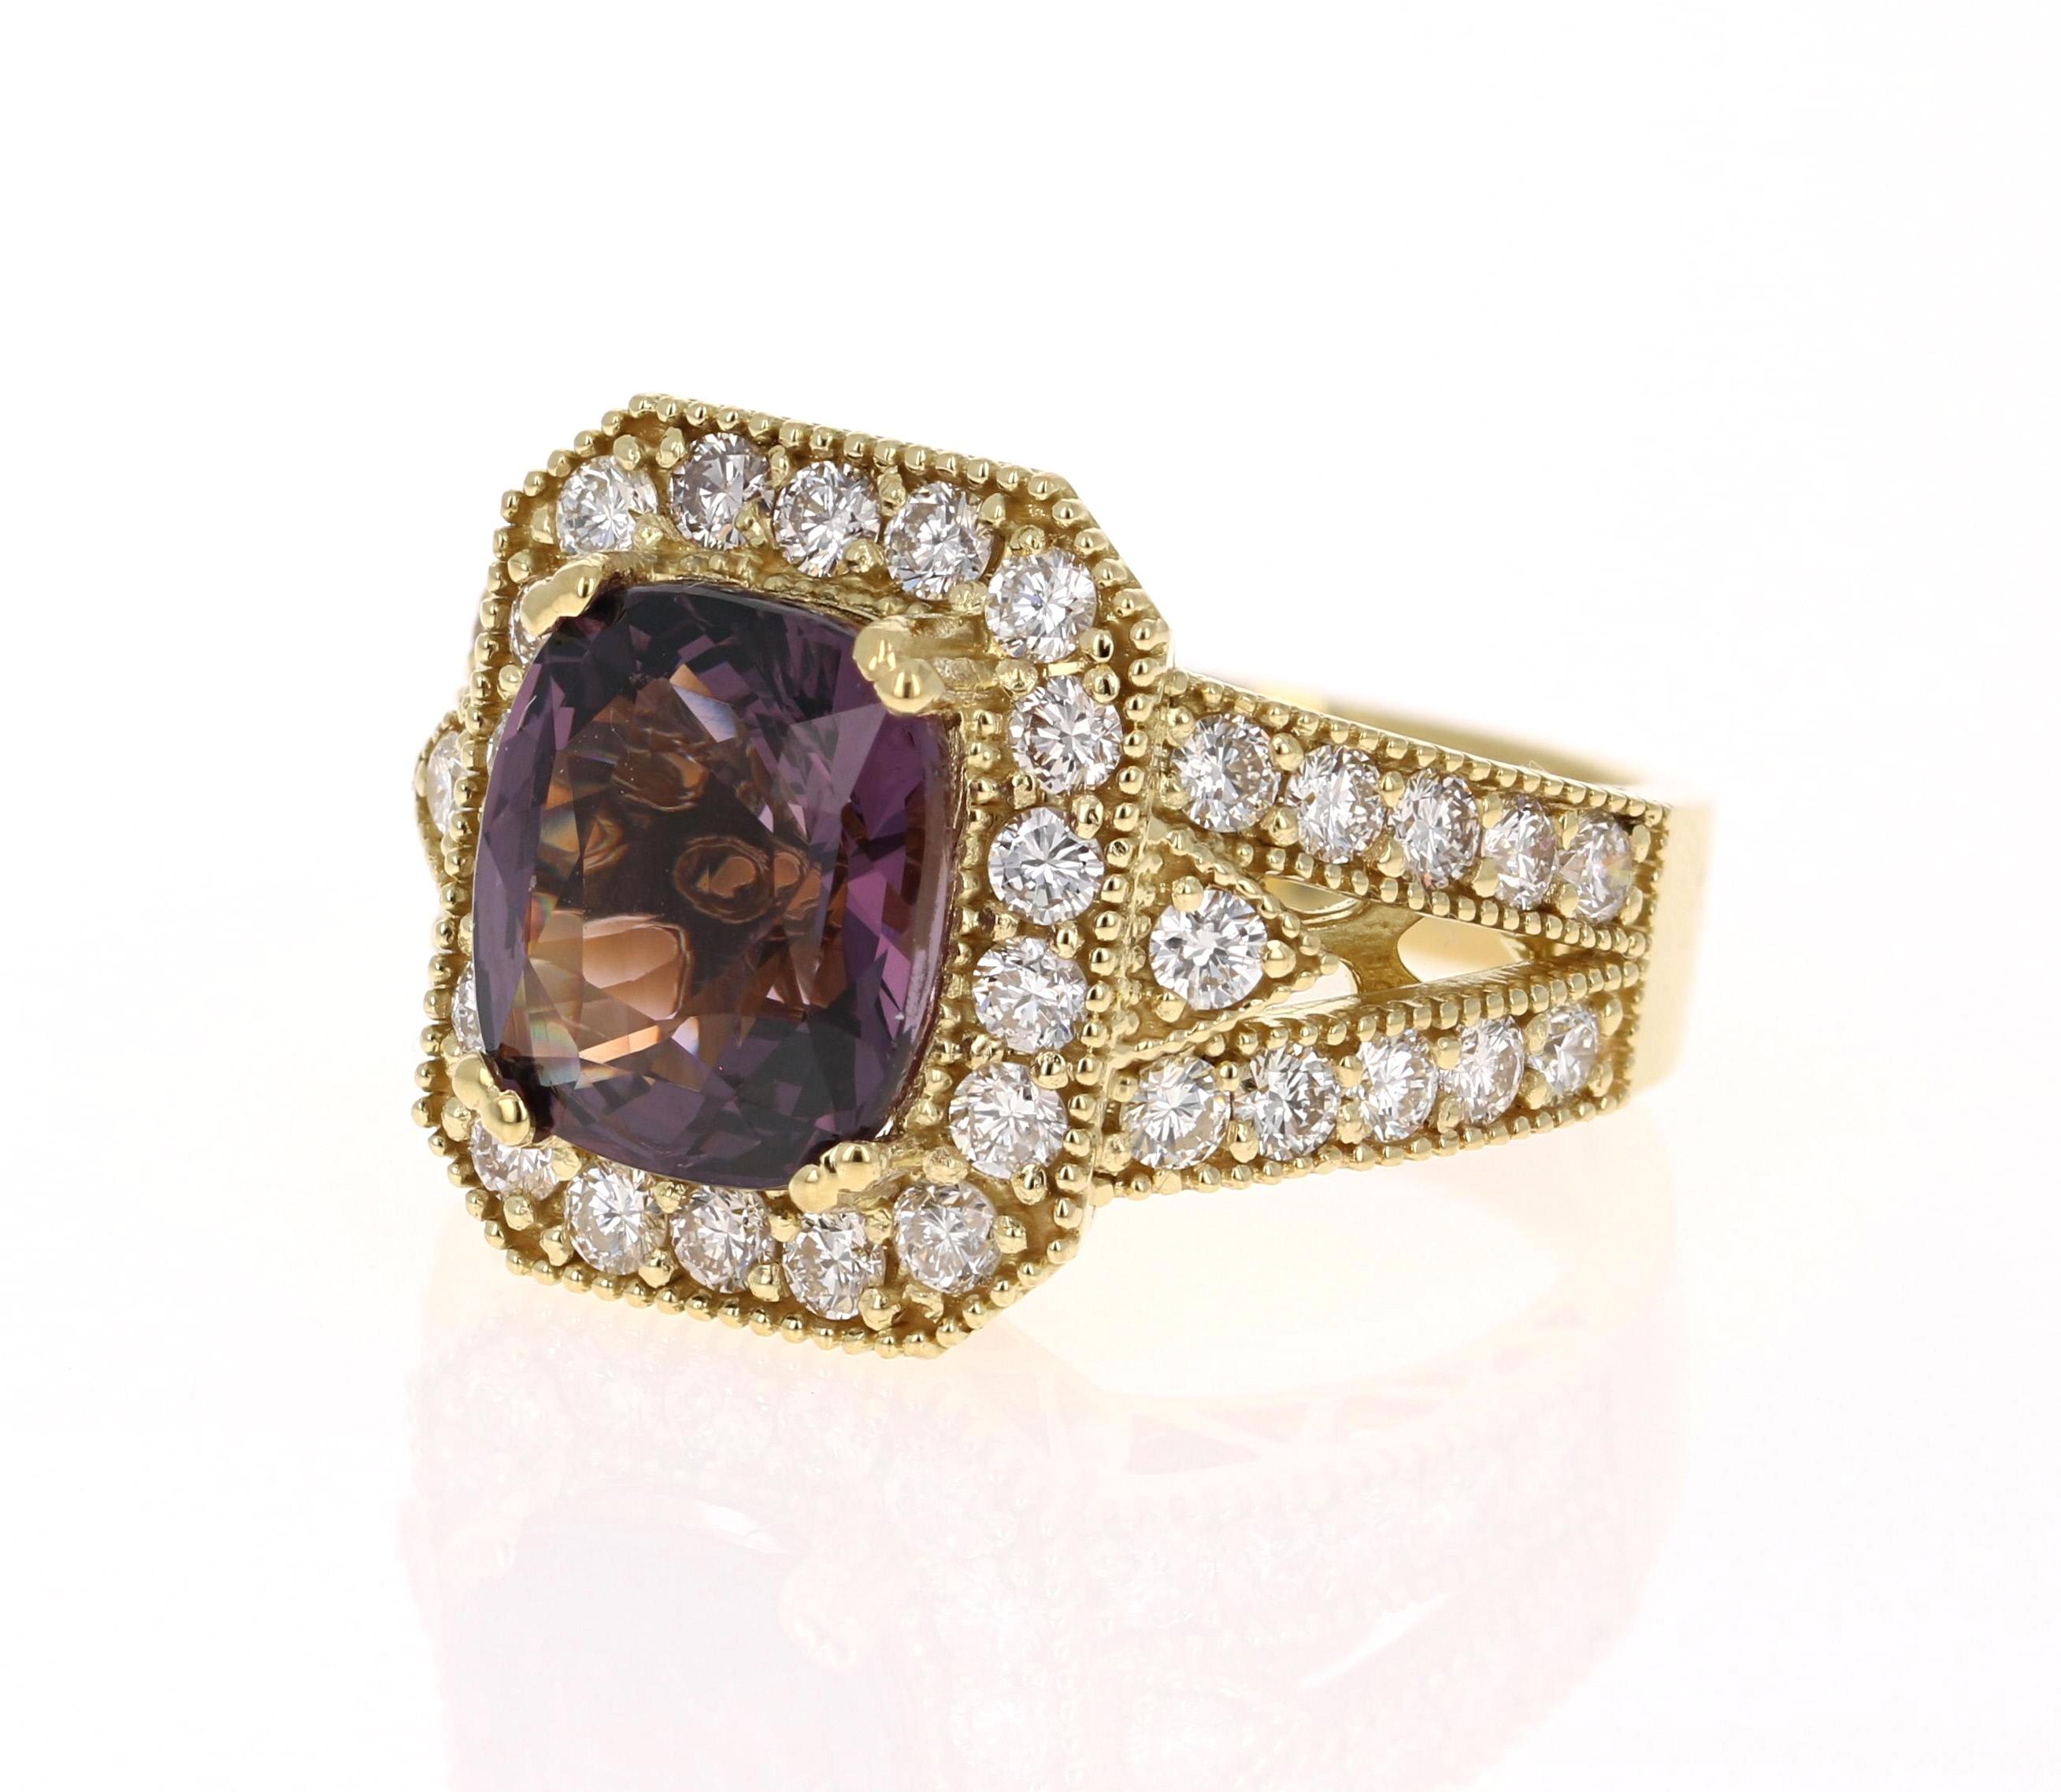 Gorgeous & Unique Cocktail Ring!

This ring has a stunning Asscher Cut Purple Spinel that weighs 4.52 Carats and has 40 Round Cut Diamonds that weigh 1.39 Carats. The Clarity and Color of the diamonds are VS2-H.   The Spinel has no indication of